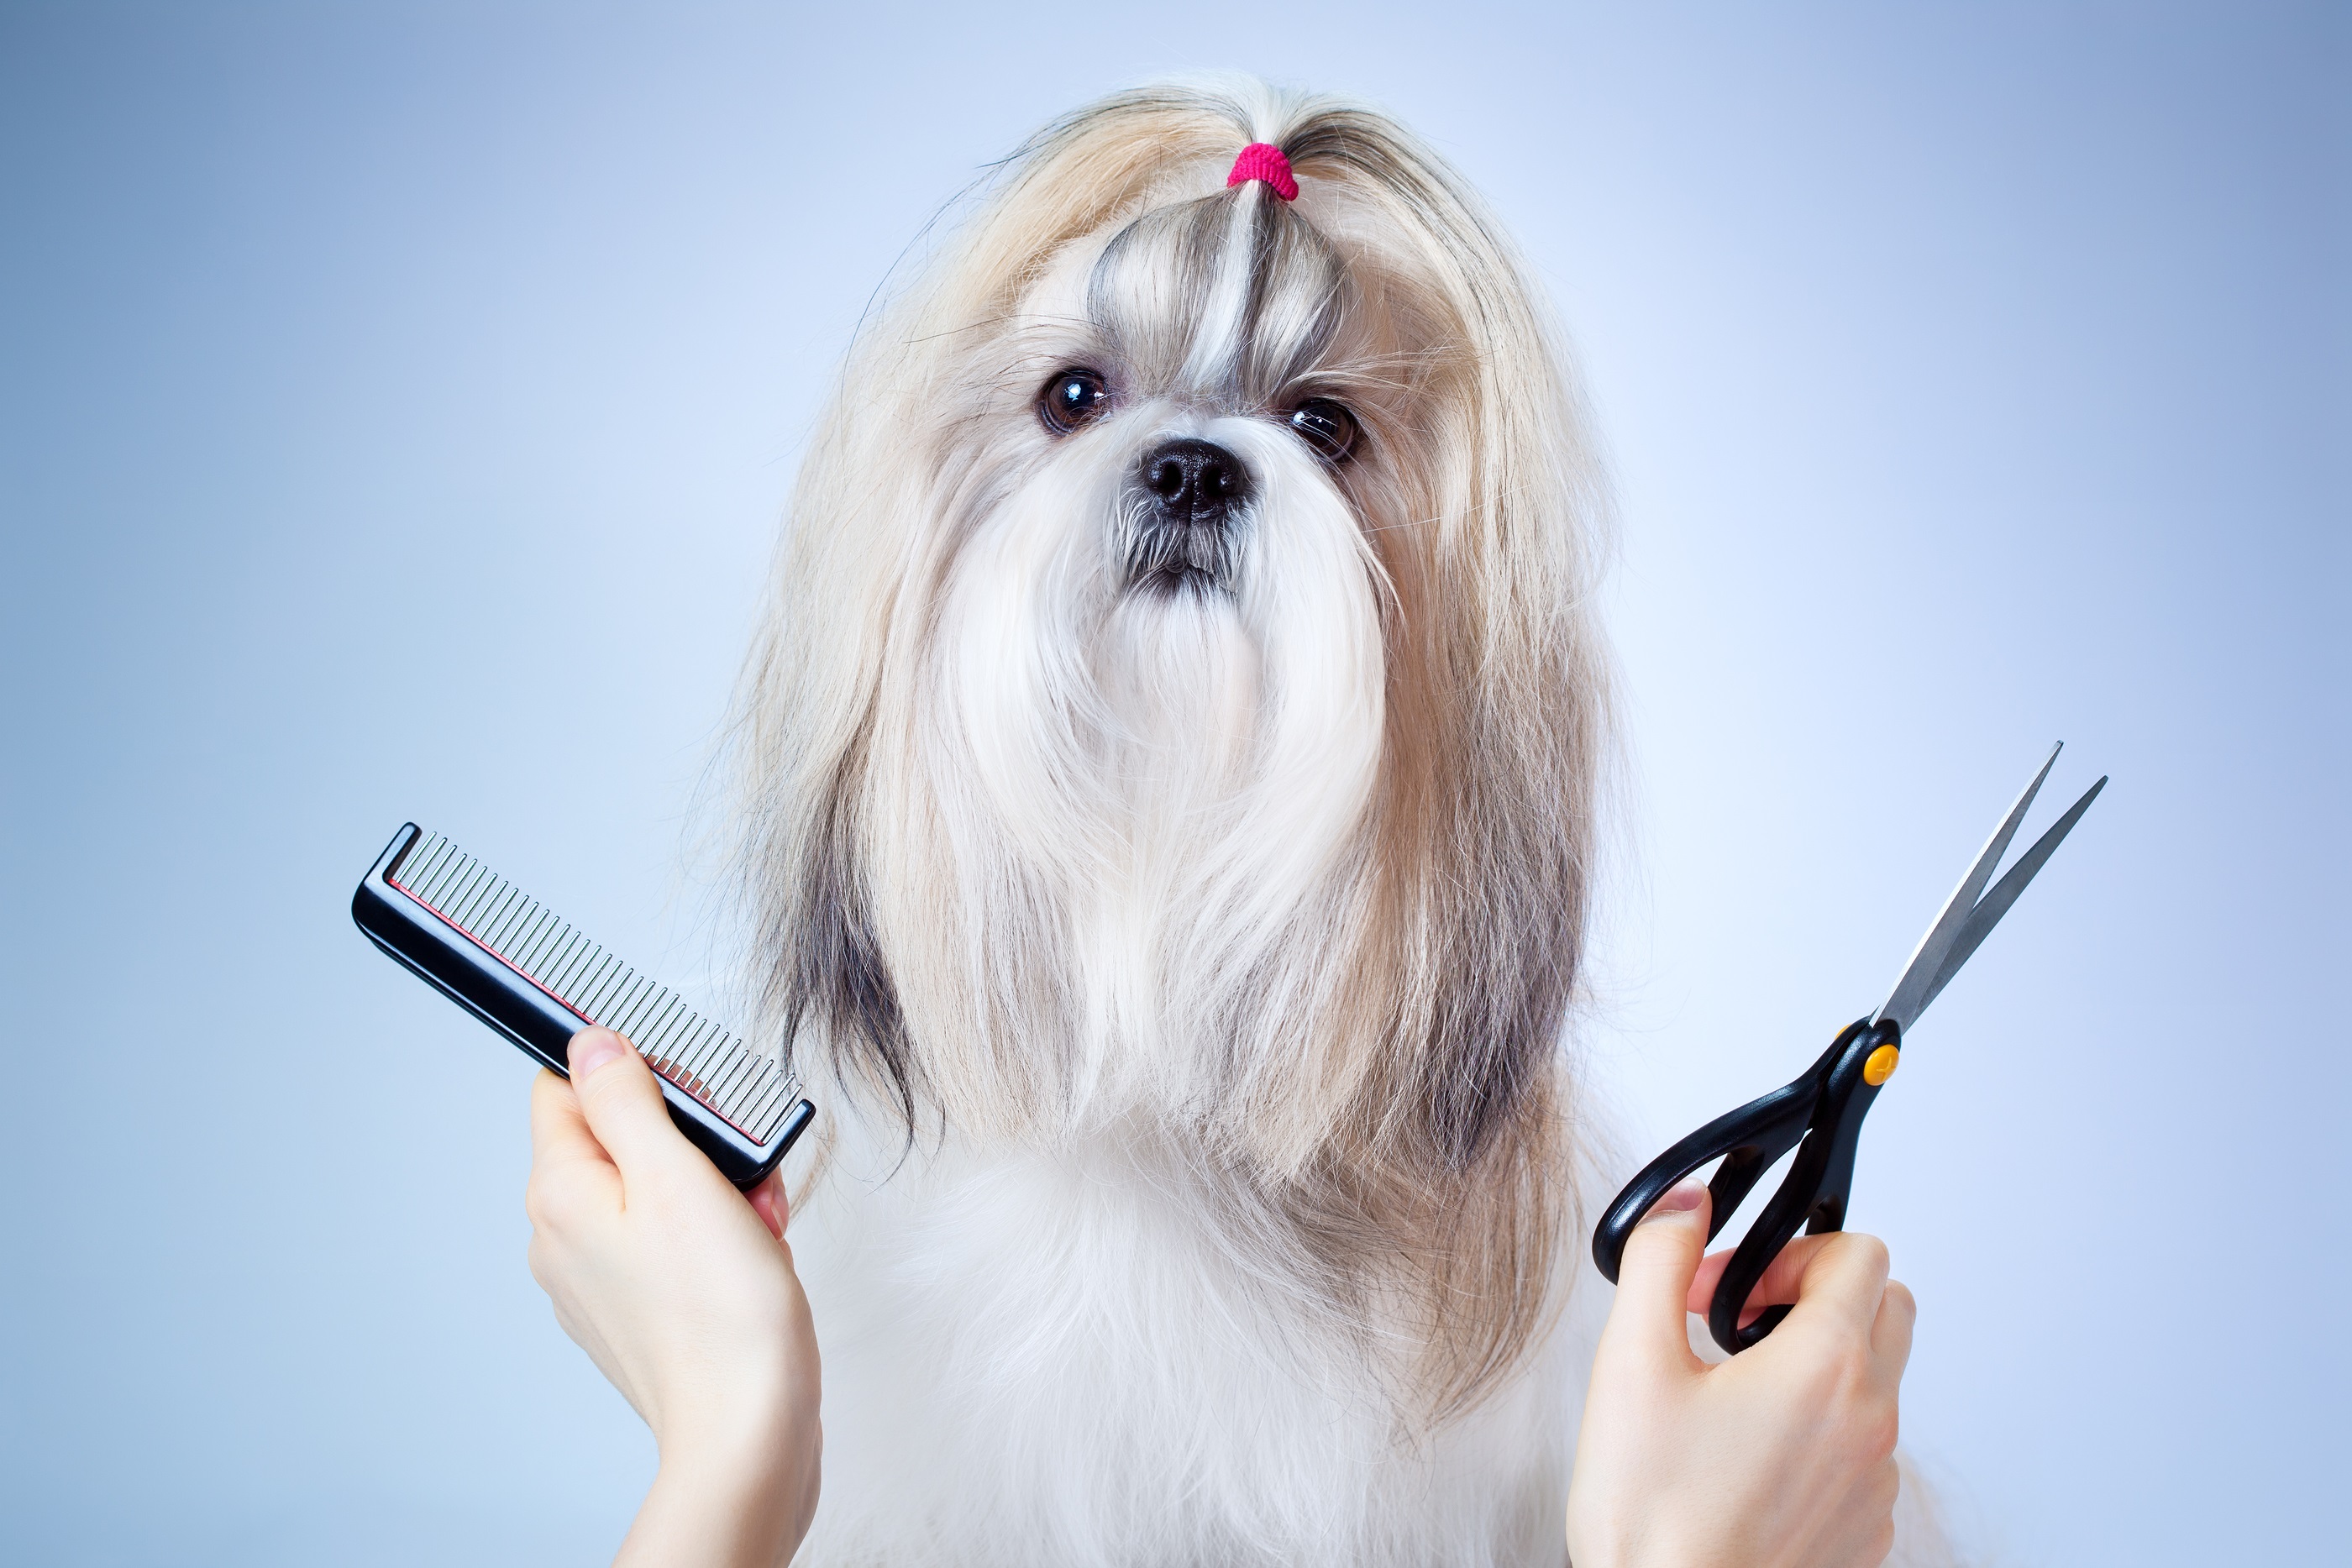 Dog grooming apps